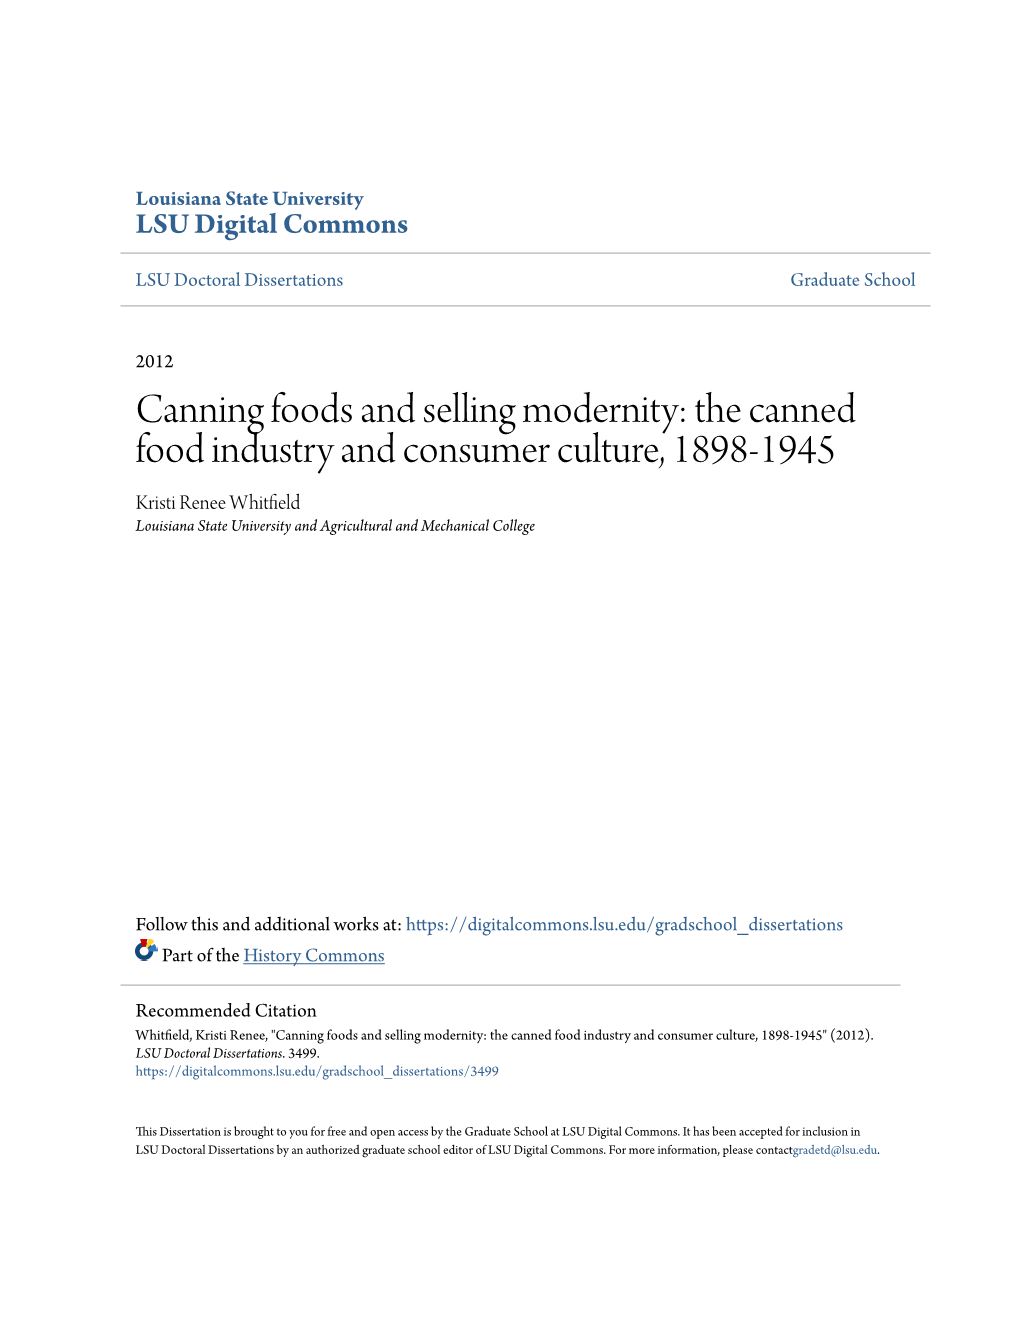 Canning Foods and Selling Modernity: the Canned Food Industry and Consumer Culture, 1898-1945